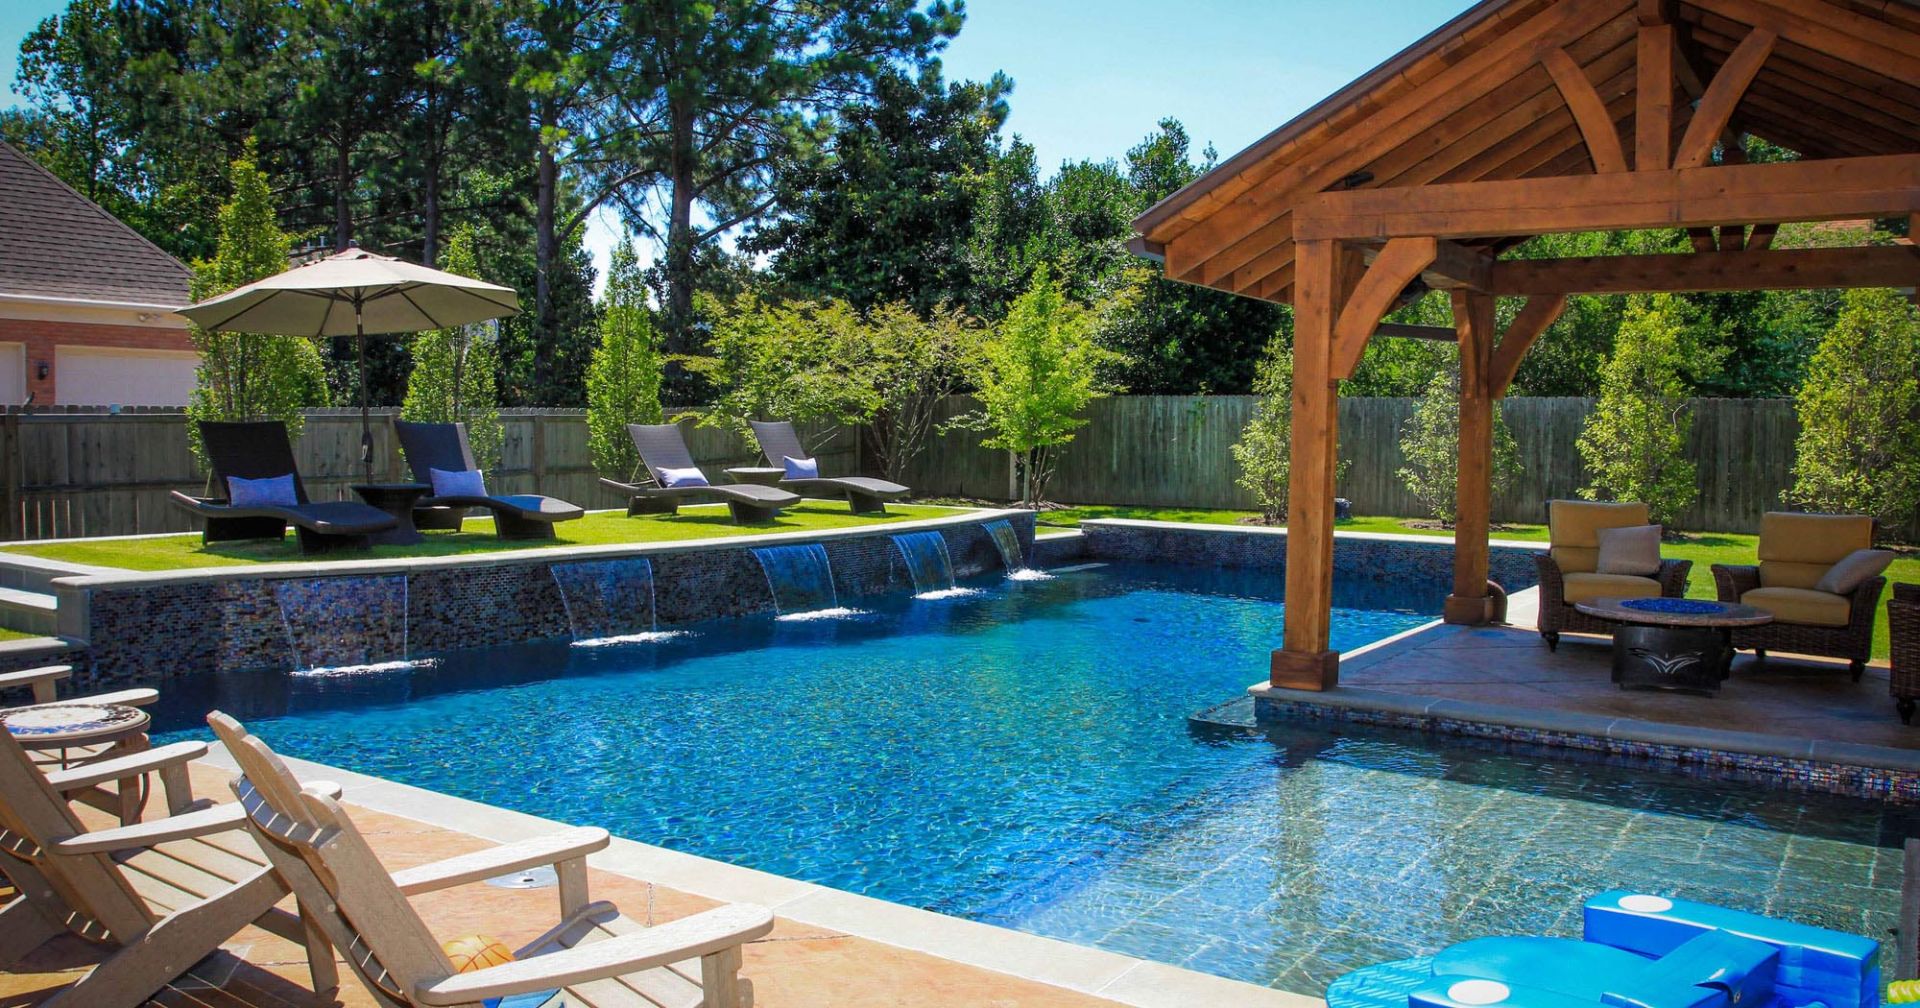 Swimming Pools for Backyards